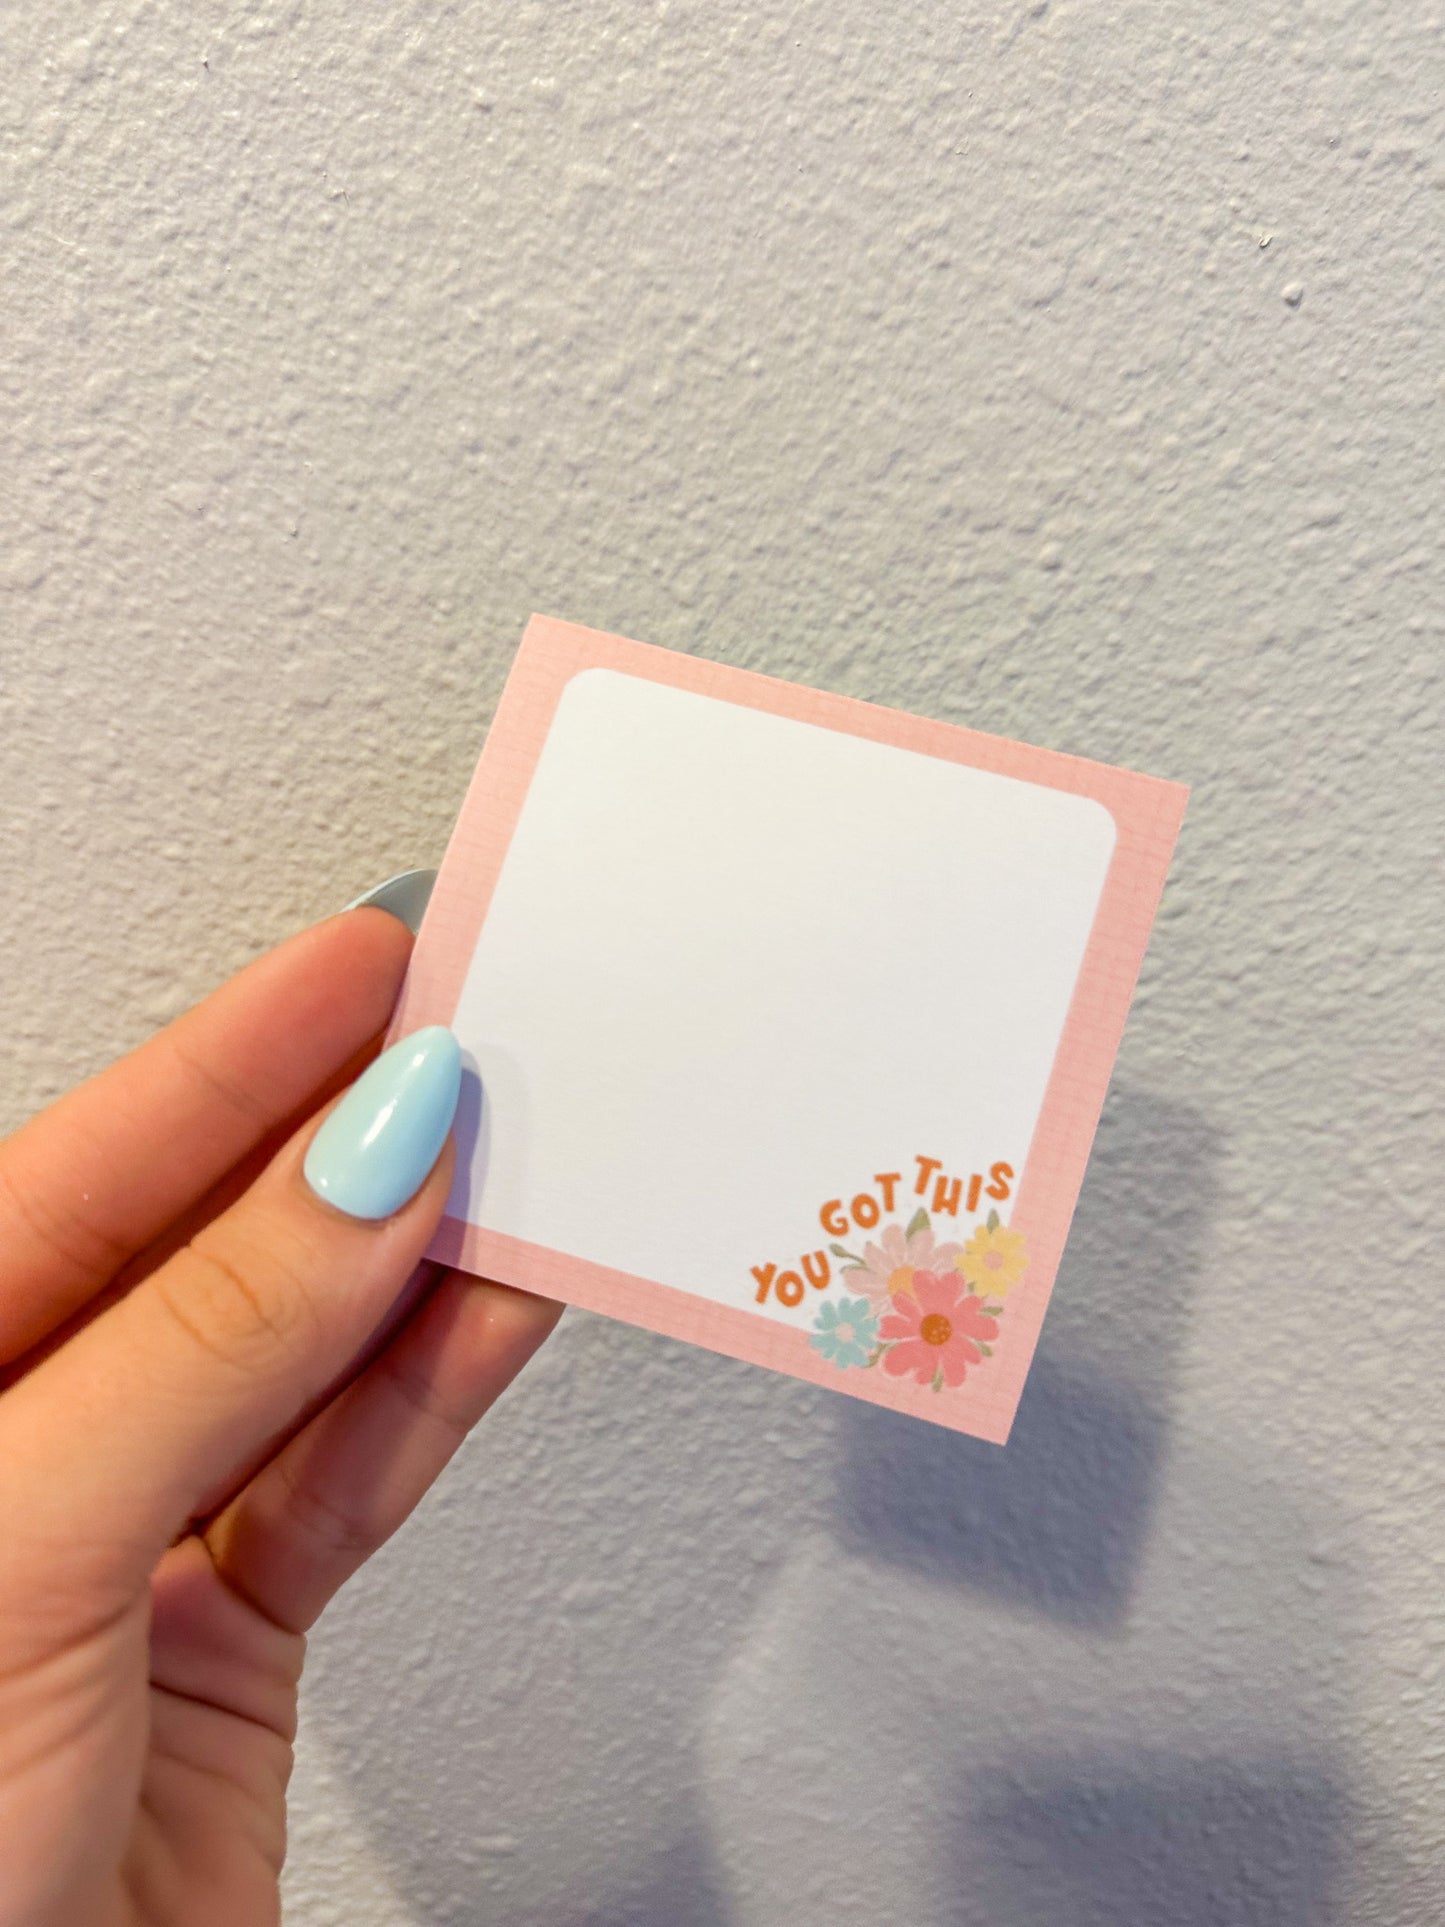 You got this sticky notes